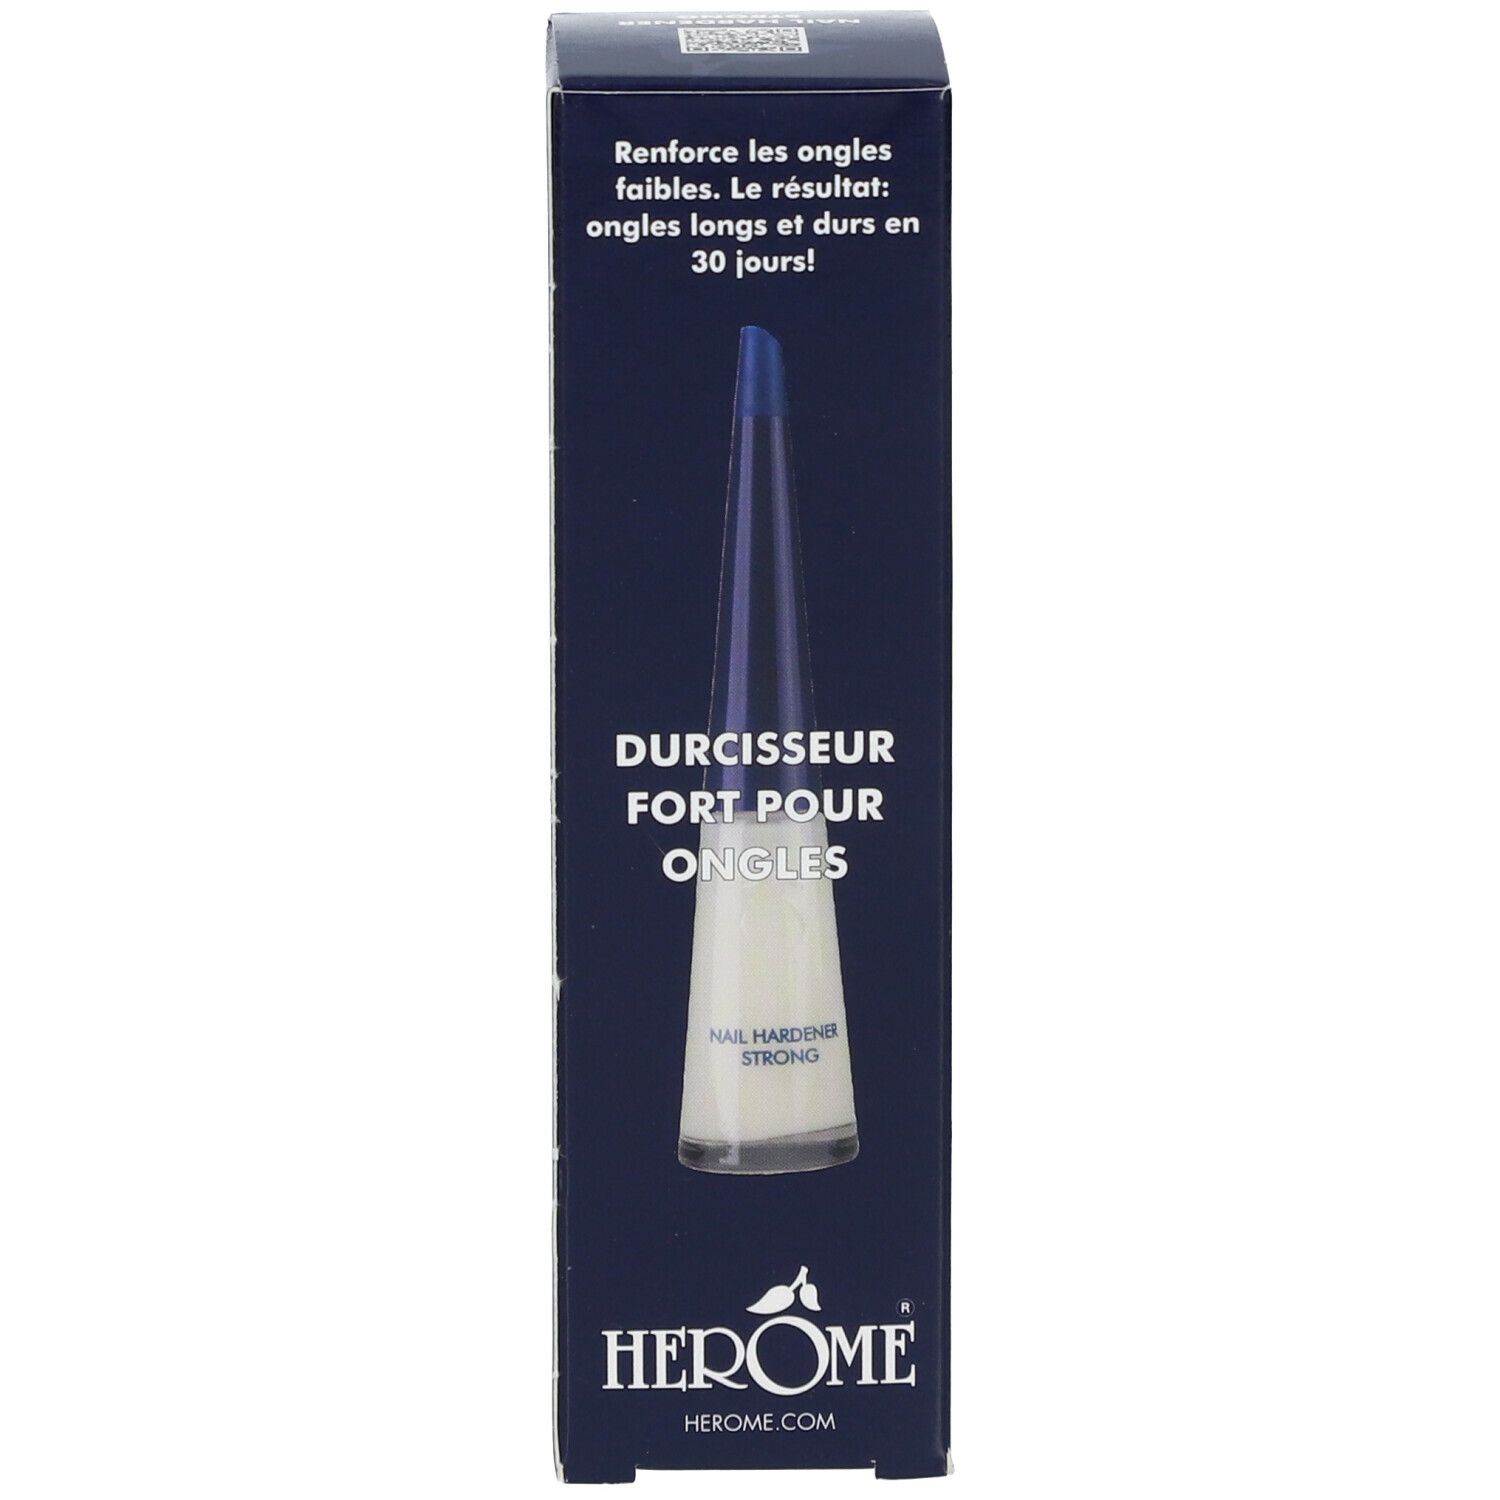 Herôme® Durcisseur fort pour ongles